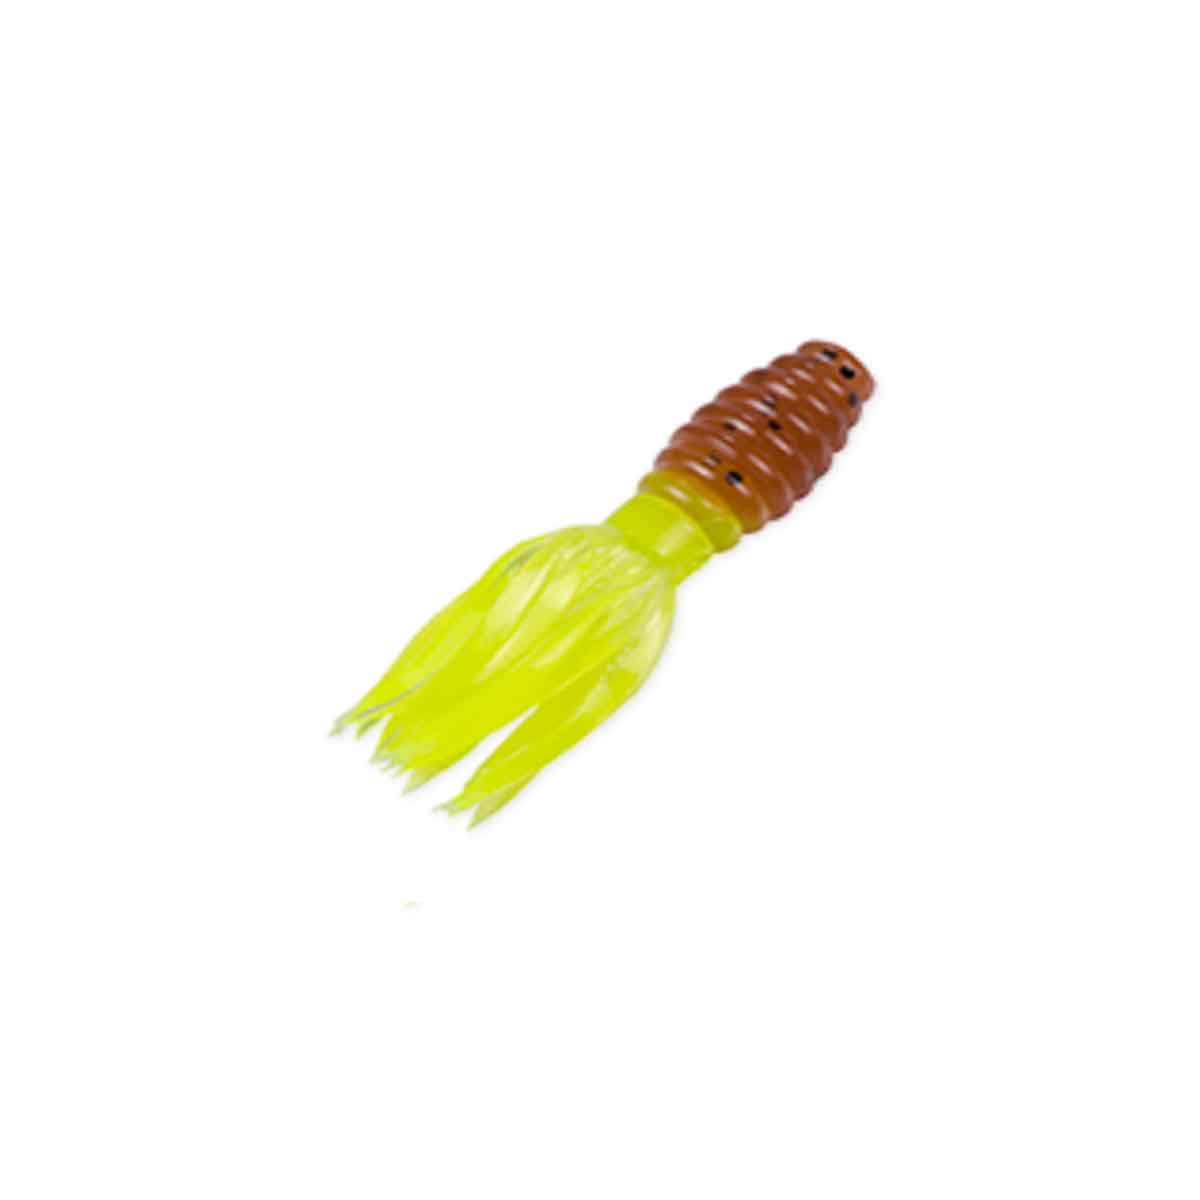 Mr. Crappie Crappie Thunder_Pumpkinseed-Chart